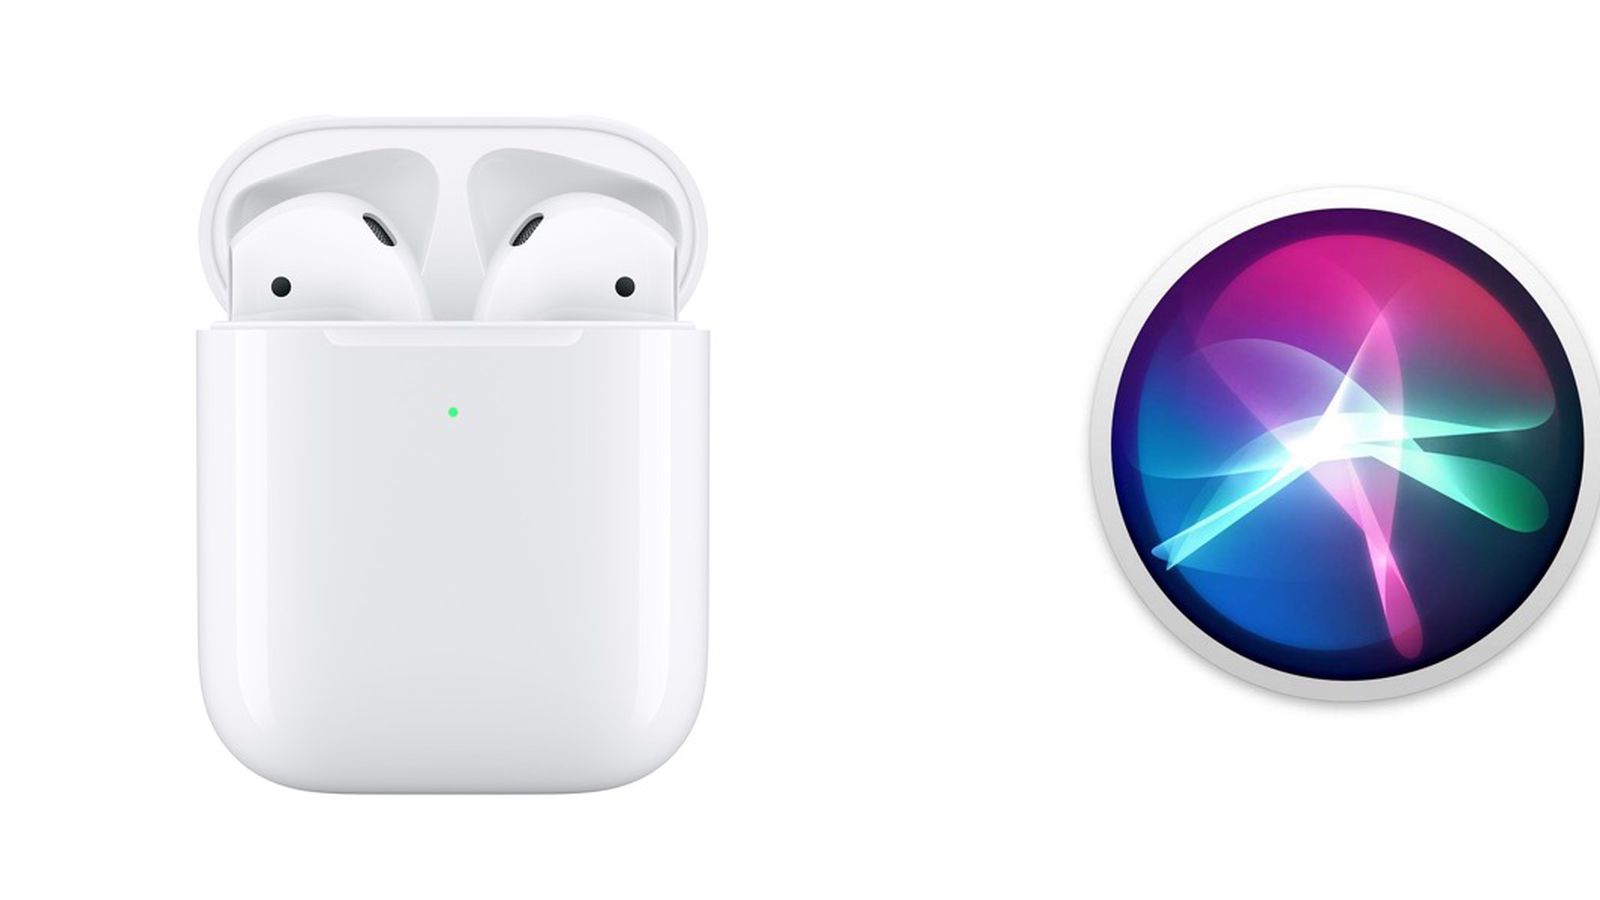 How to Use the 'Hey Siri' Command With AirPods (2nd Generation) and Pro - MacRumors